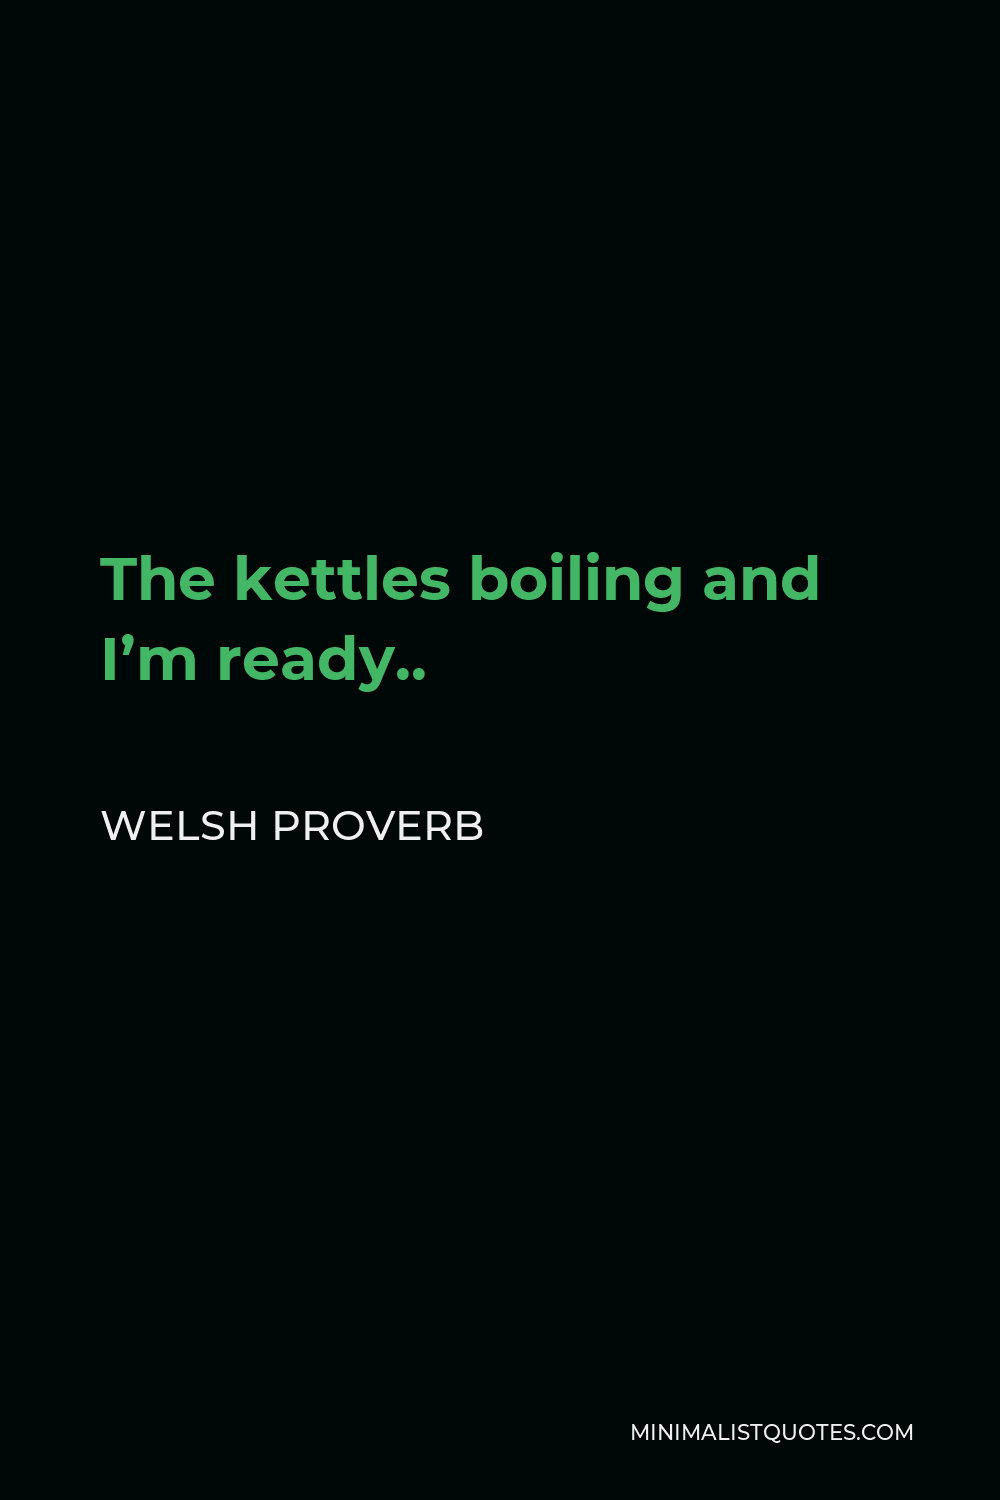 Welsh Proverb Quote - The kettles boiling and I’m ready..